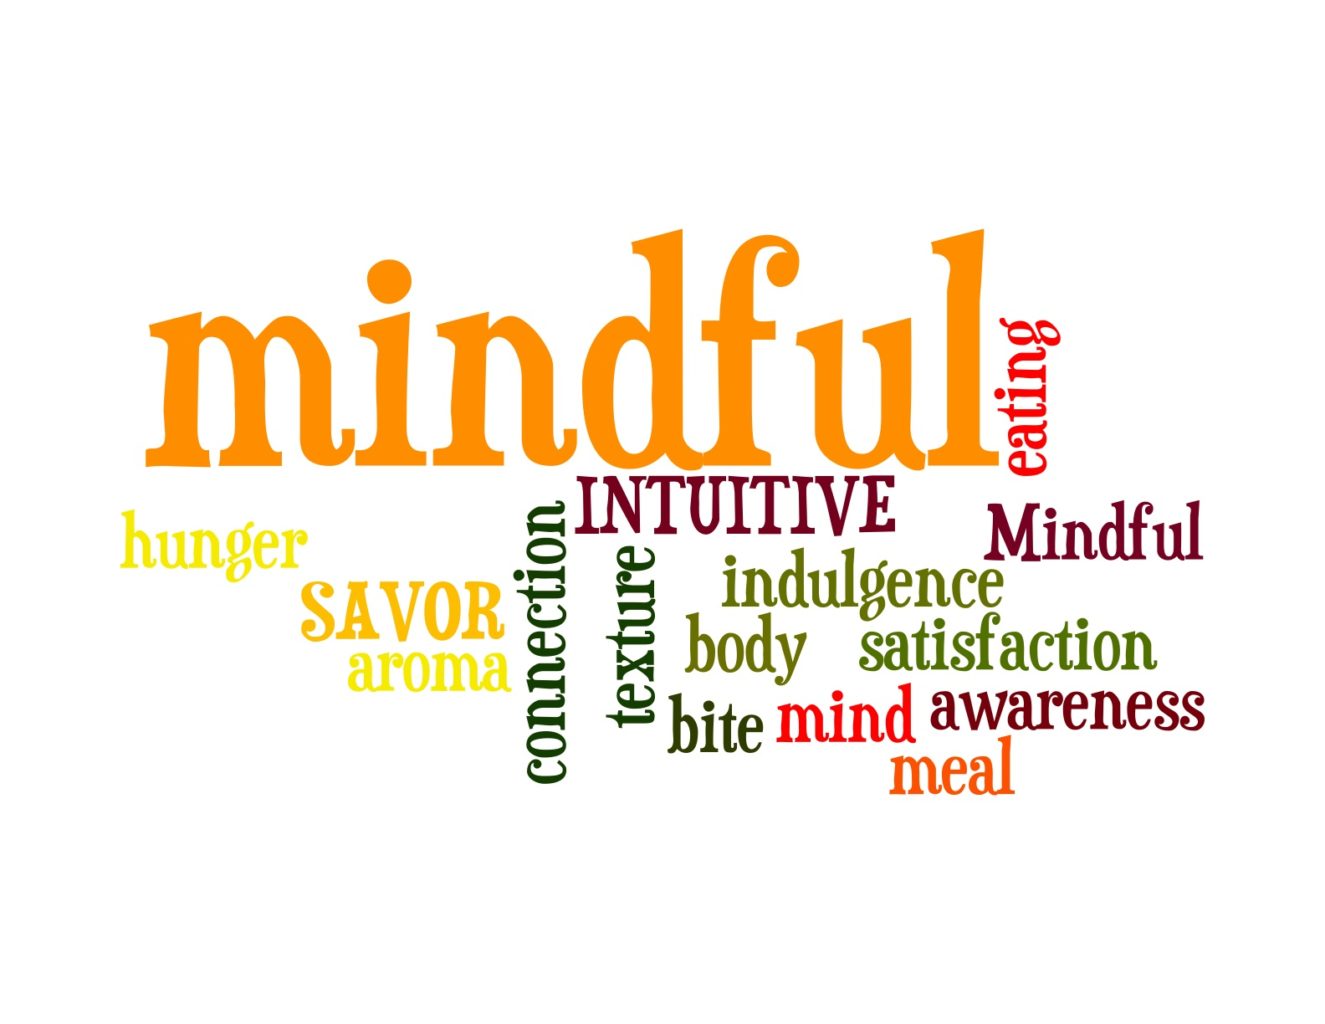 Mindfulness in eating: experience the bliss of well-being